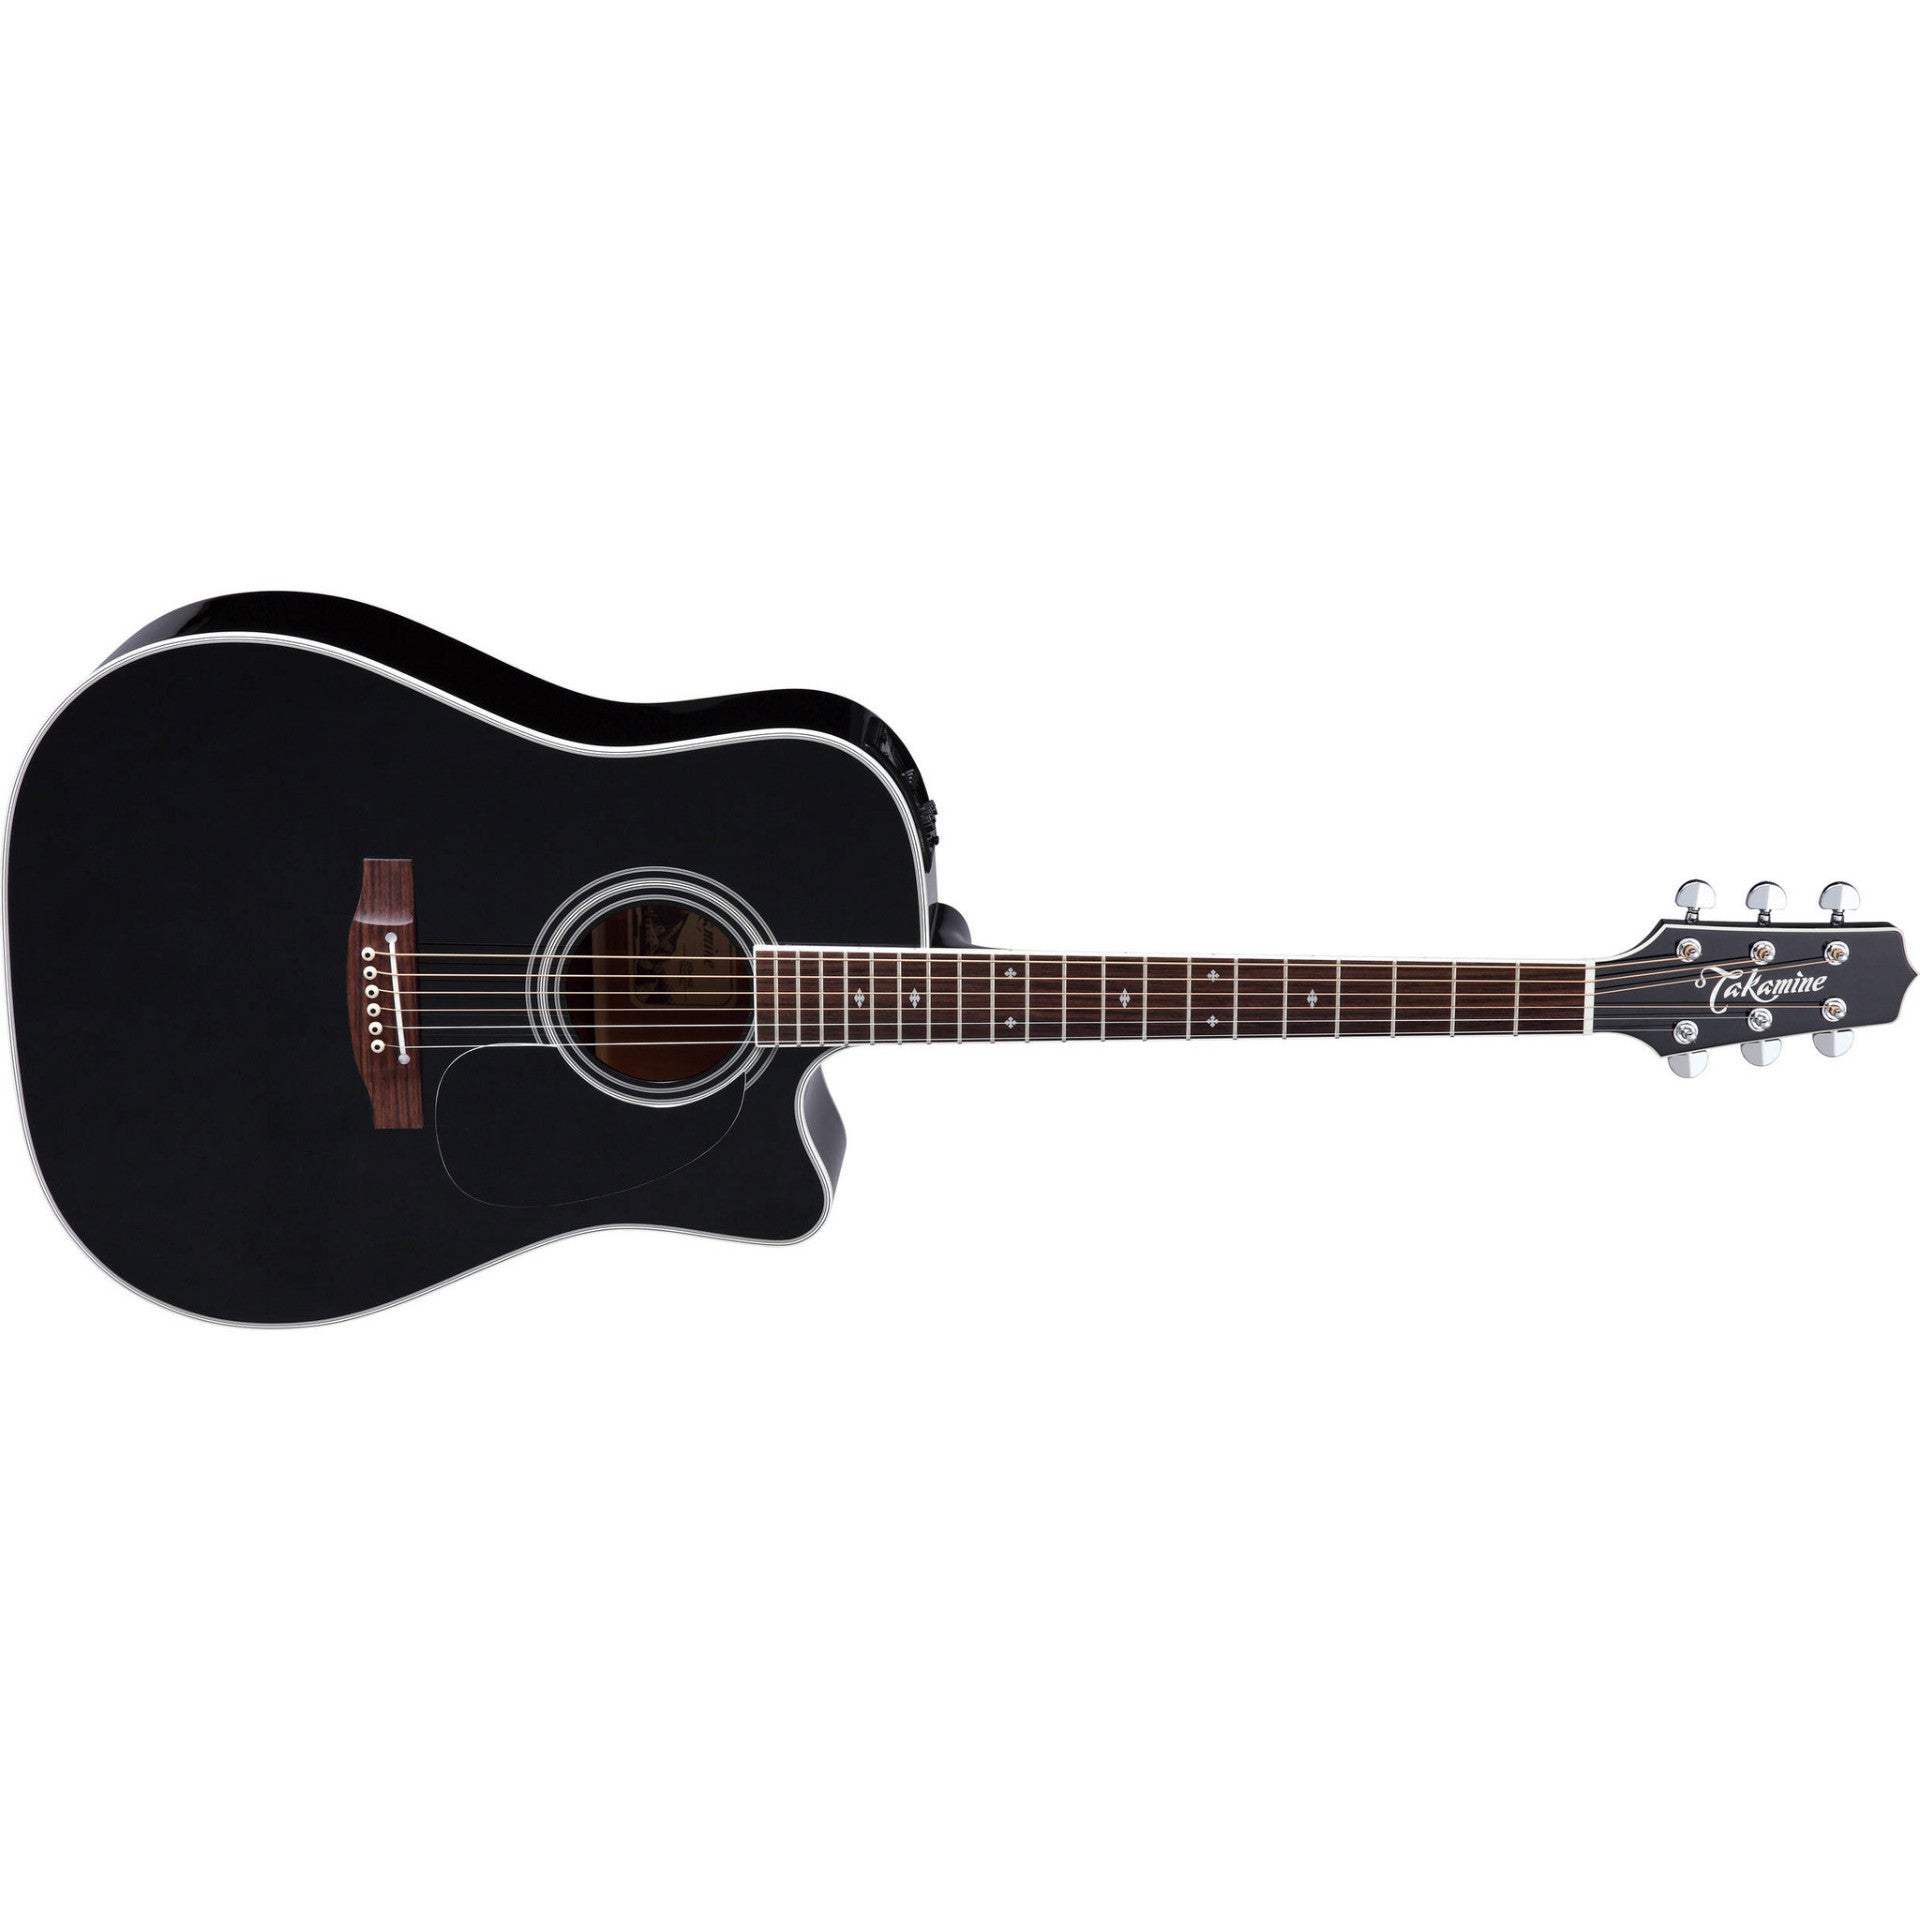 Takamine Pro Series Made in Japan EF341SC Dreadnought Acoustic Electric Guitar, Black with Case